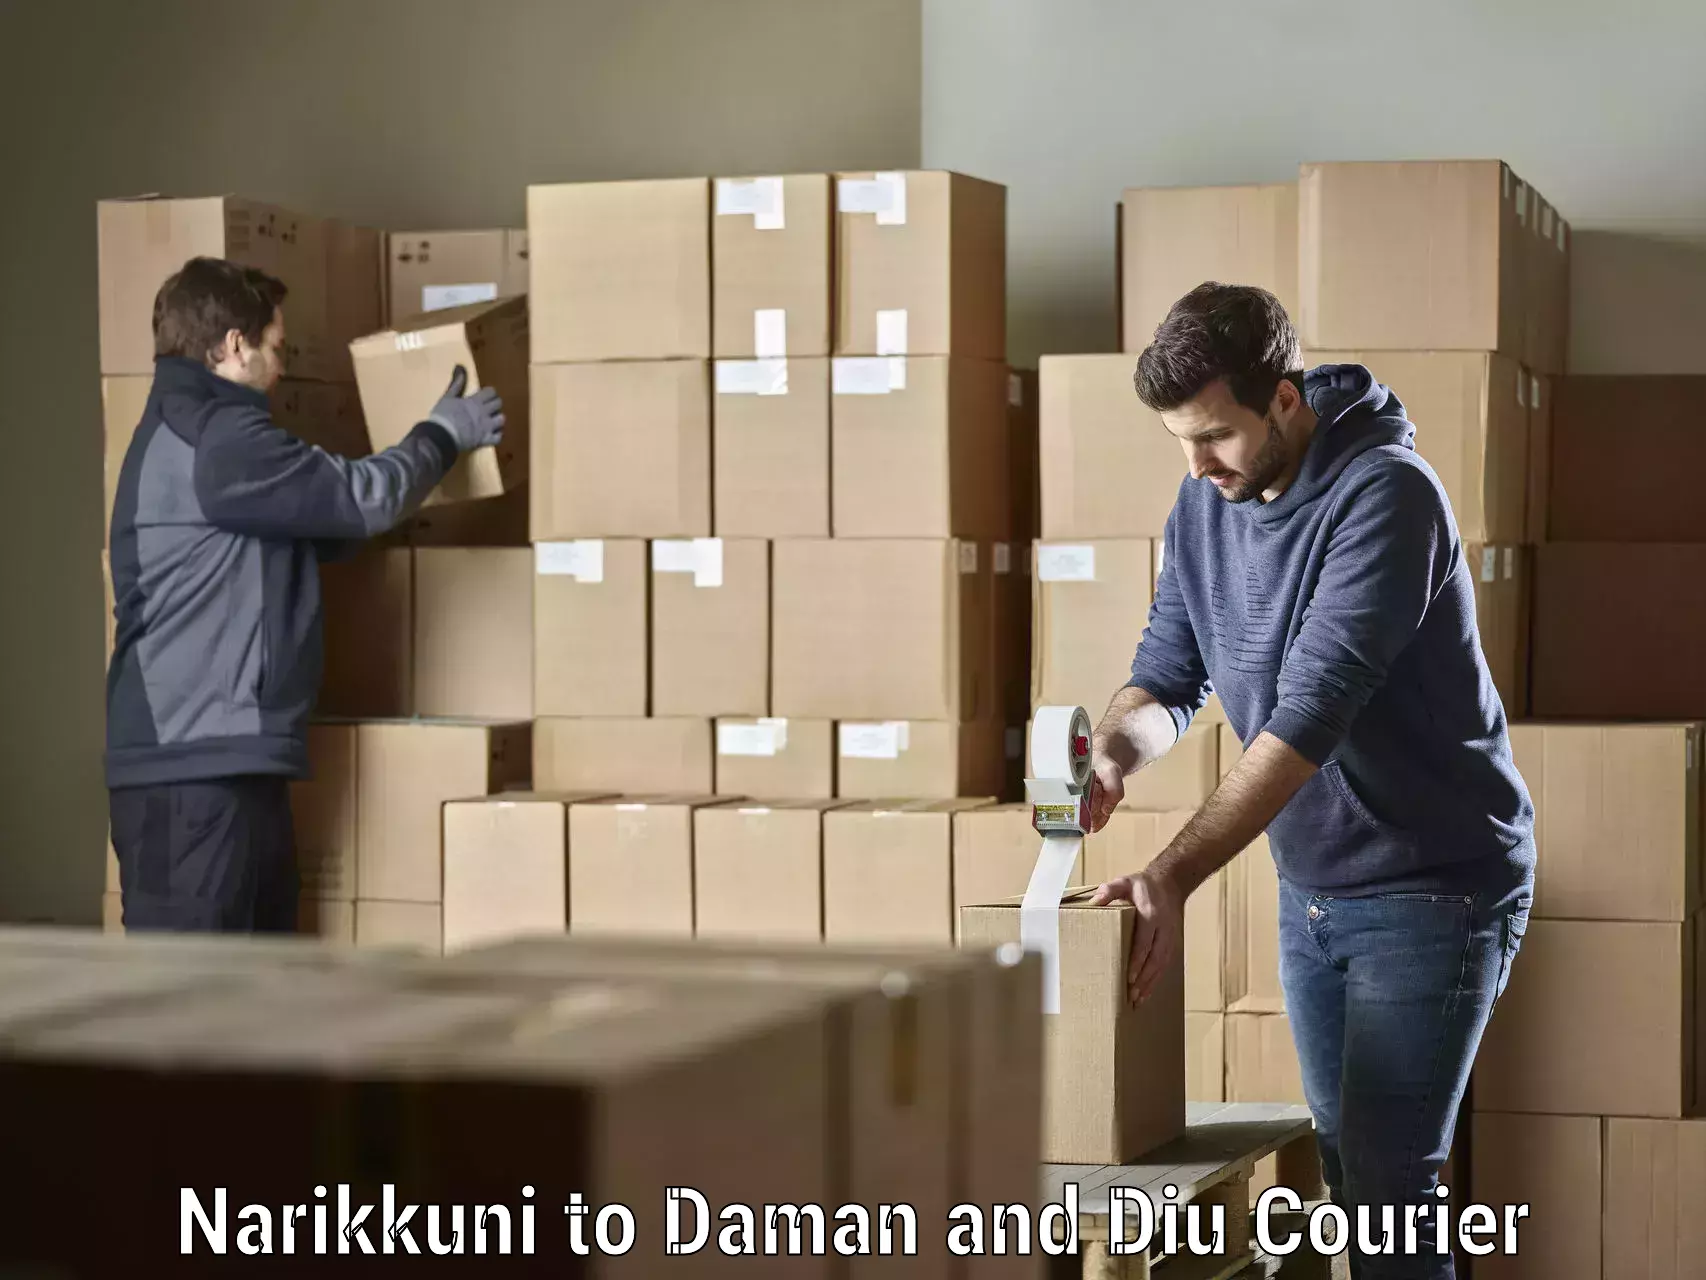 Easy access courier services Narikkuni to Daman and Diu